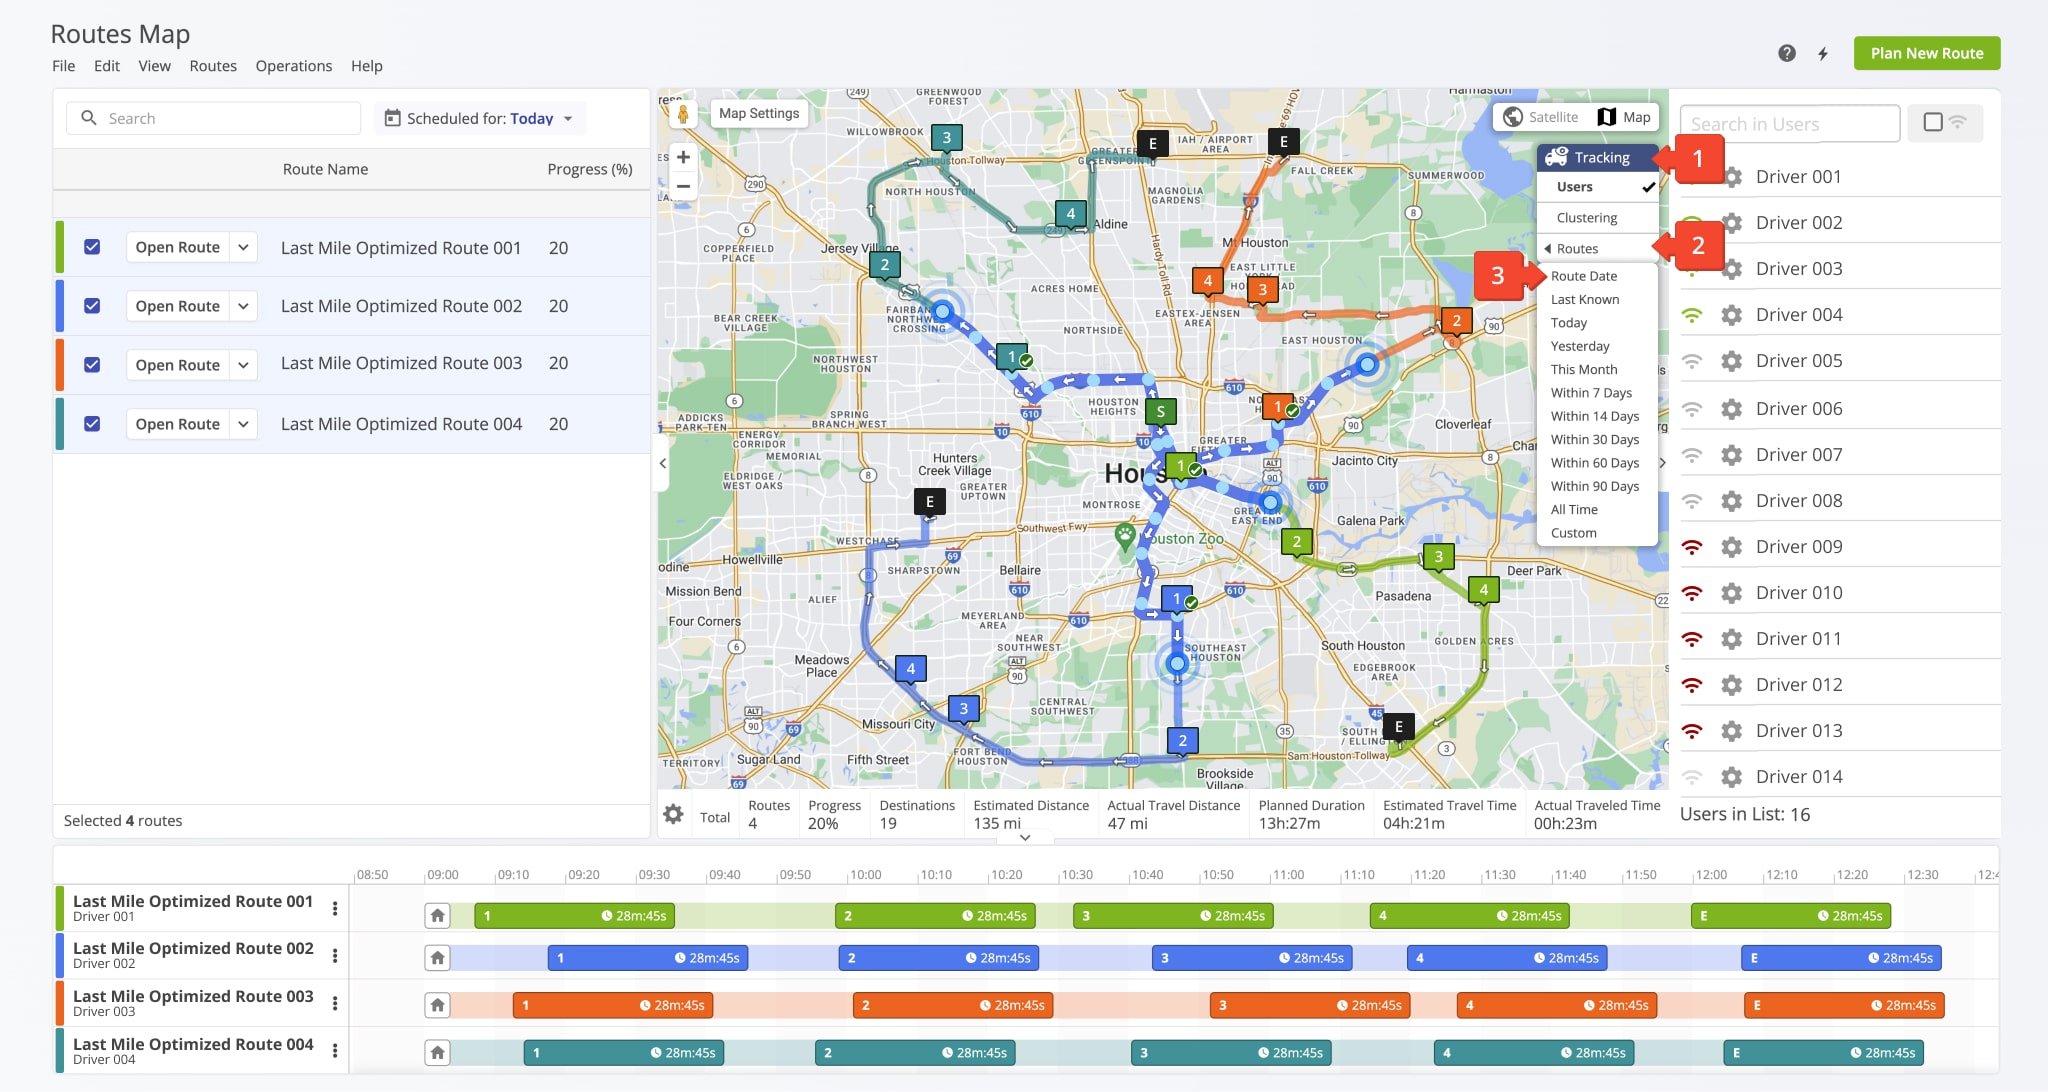 When tracking multiple routes on your Route4Me Routes Map you can enable tracking paths to view the GPS tracking path of multiple routes simultaneously.